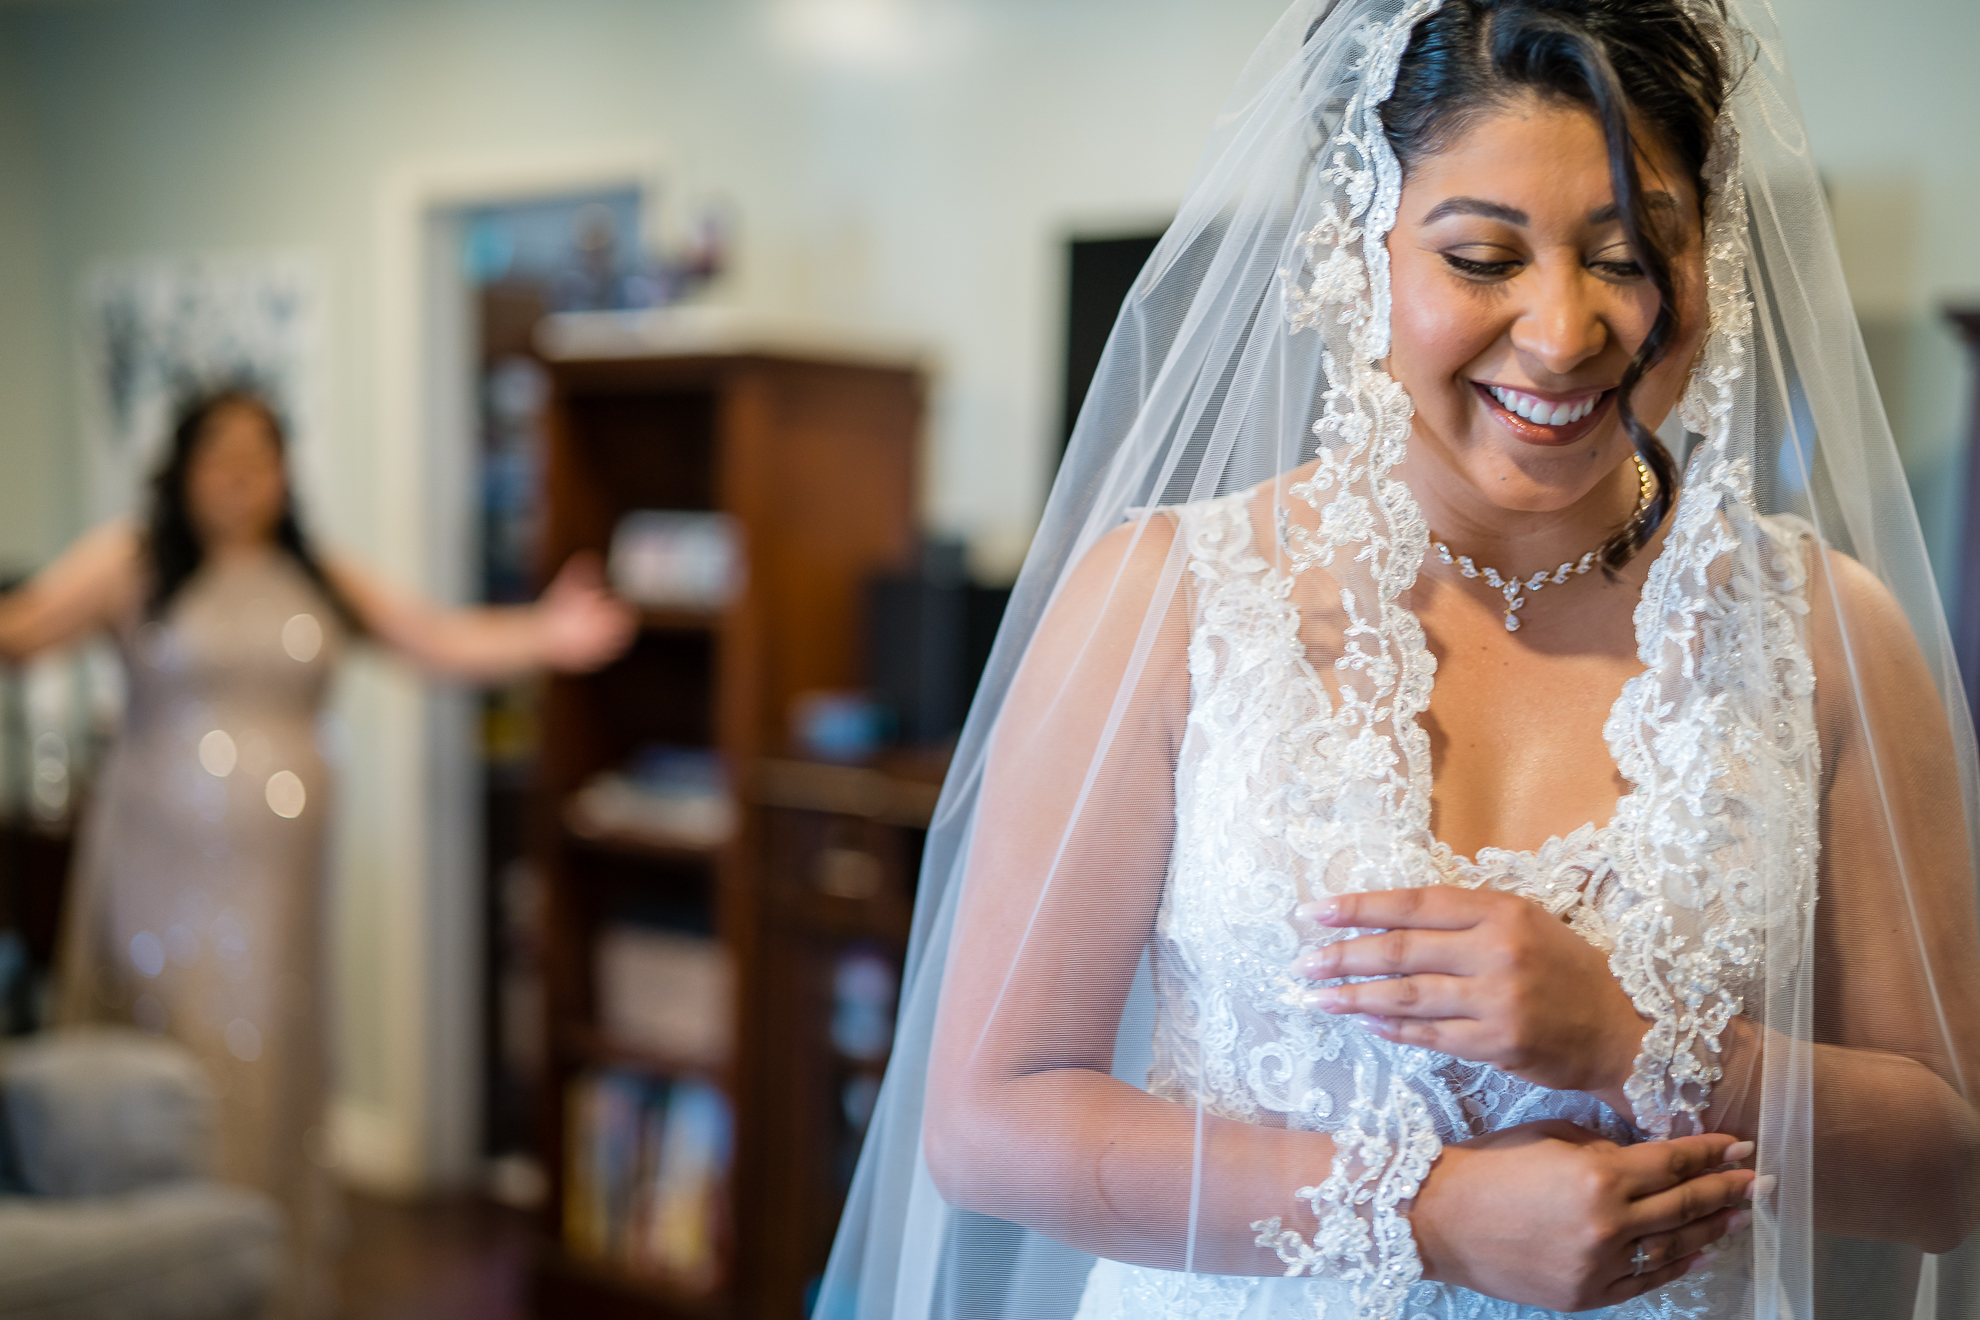 ThomasKim_photography A bride smiles as she puts on her wedding veil, showcasing joy and anticipation.